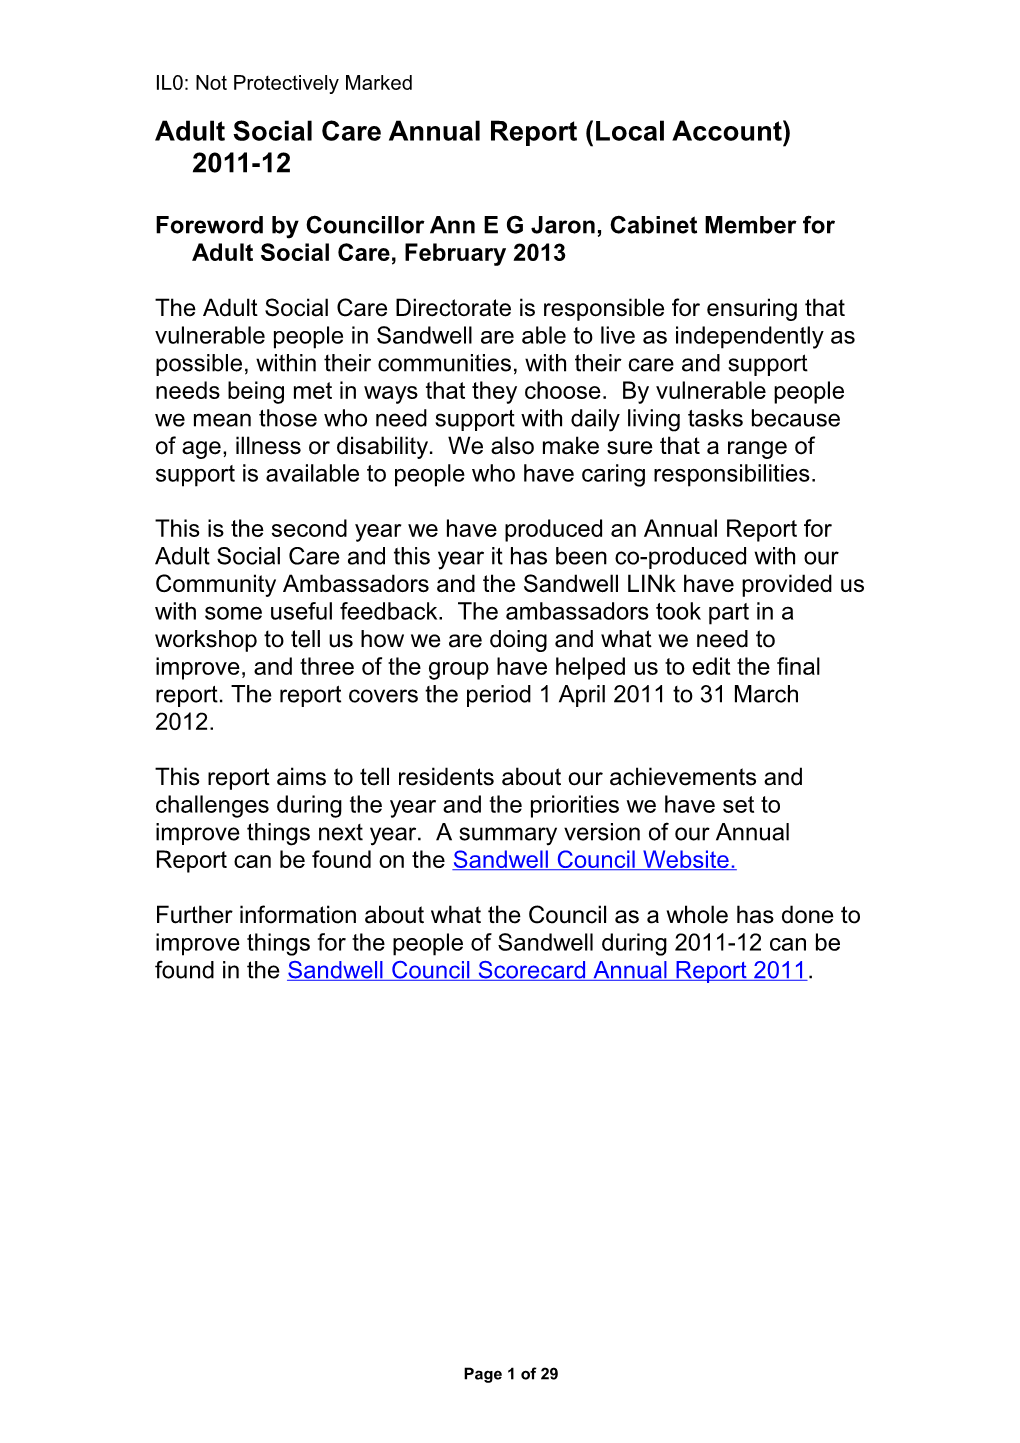 Adult Social Care Annual Report (Local Account) 2011-12